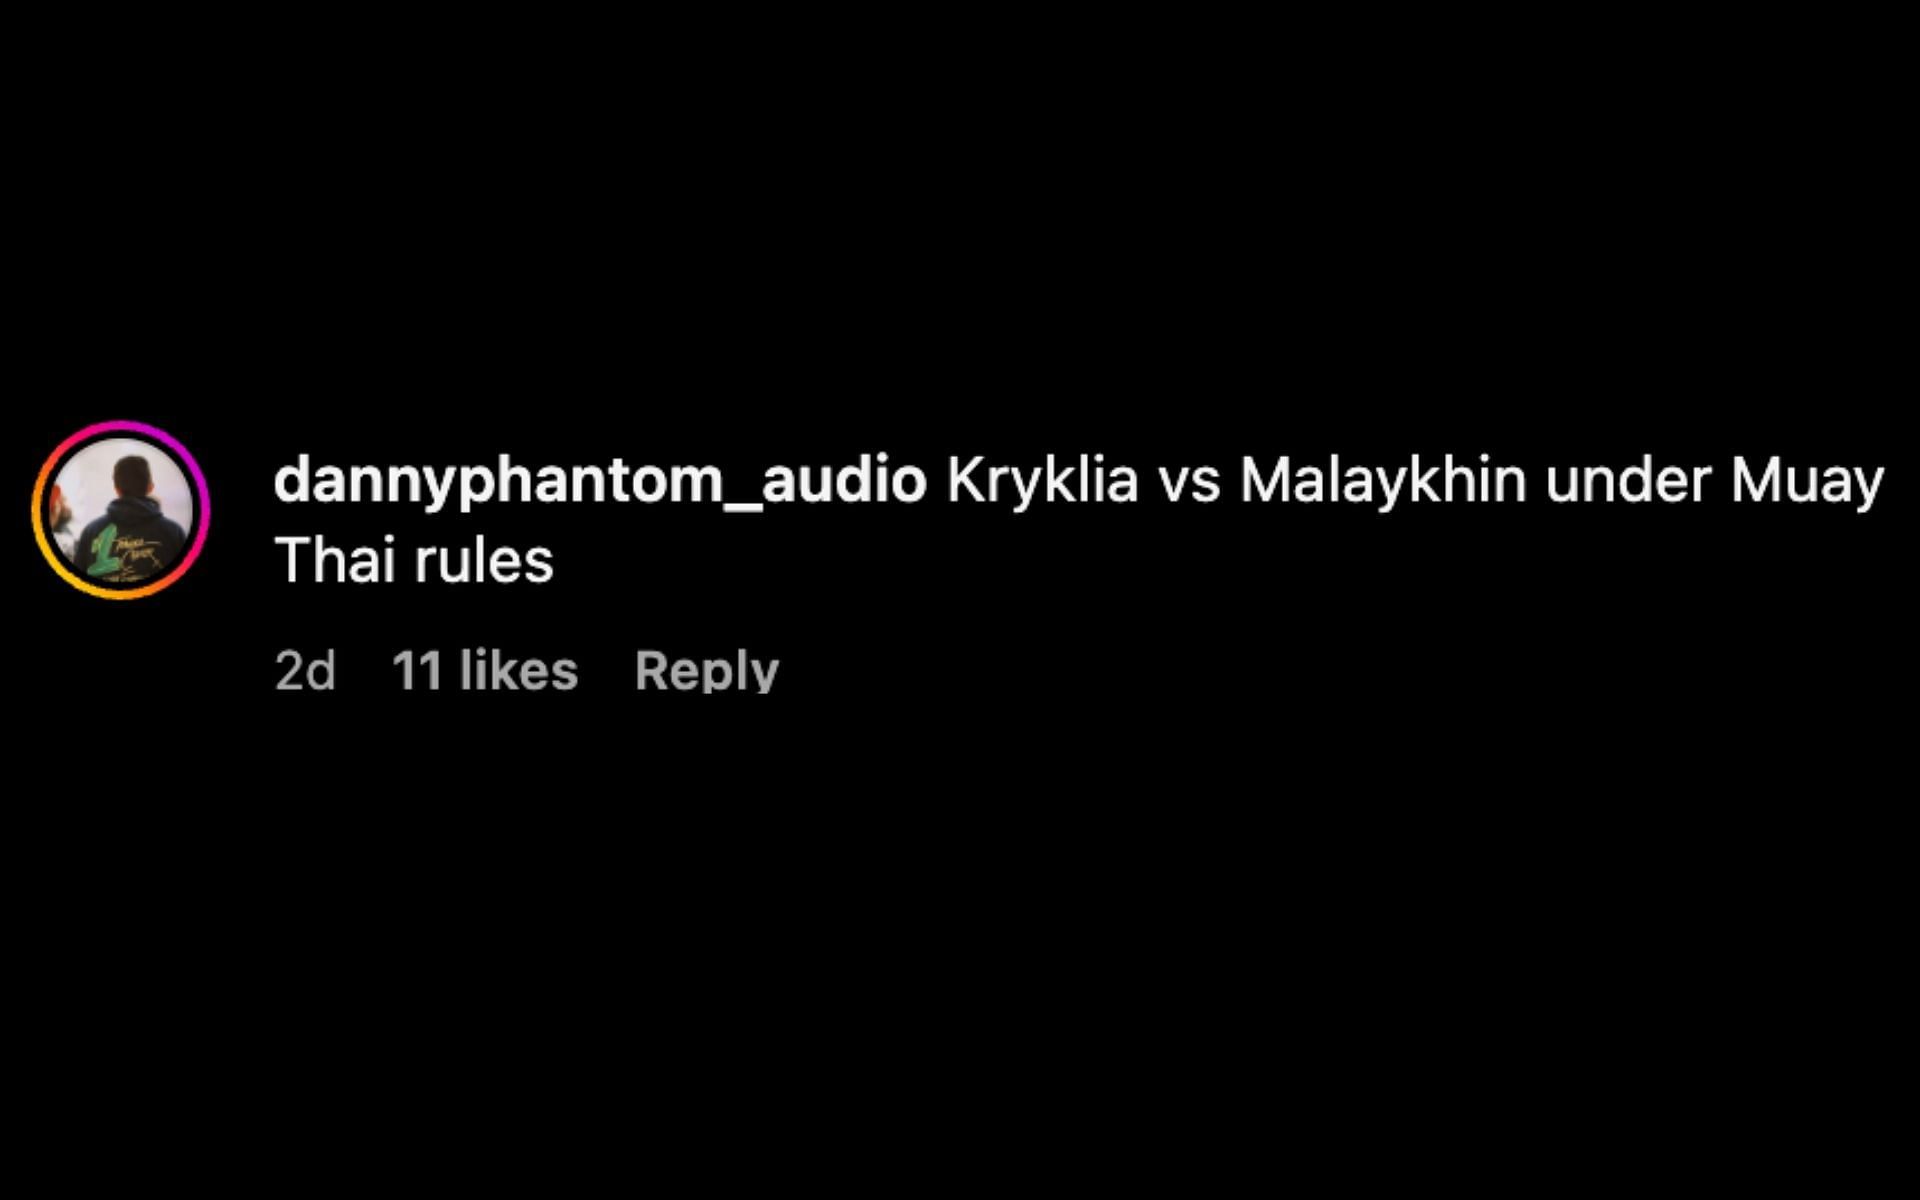 Comment on who Kryklia should fight next